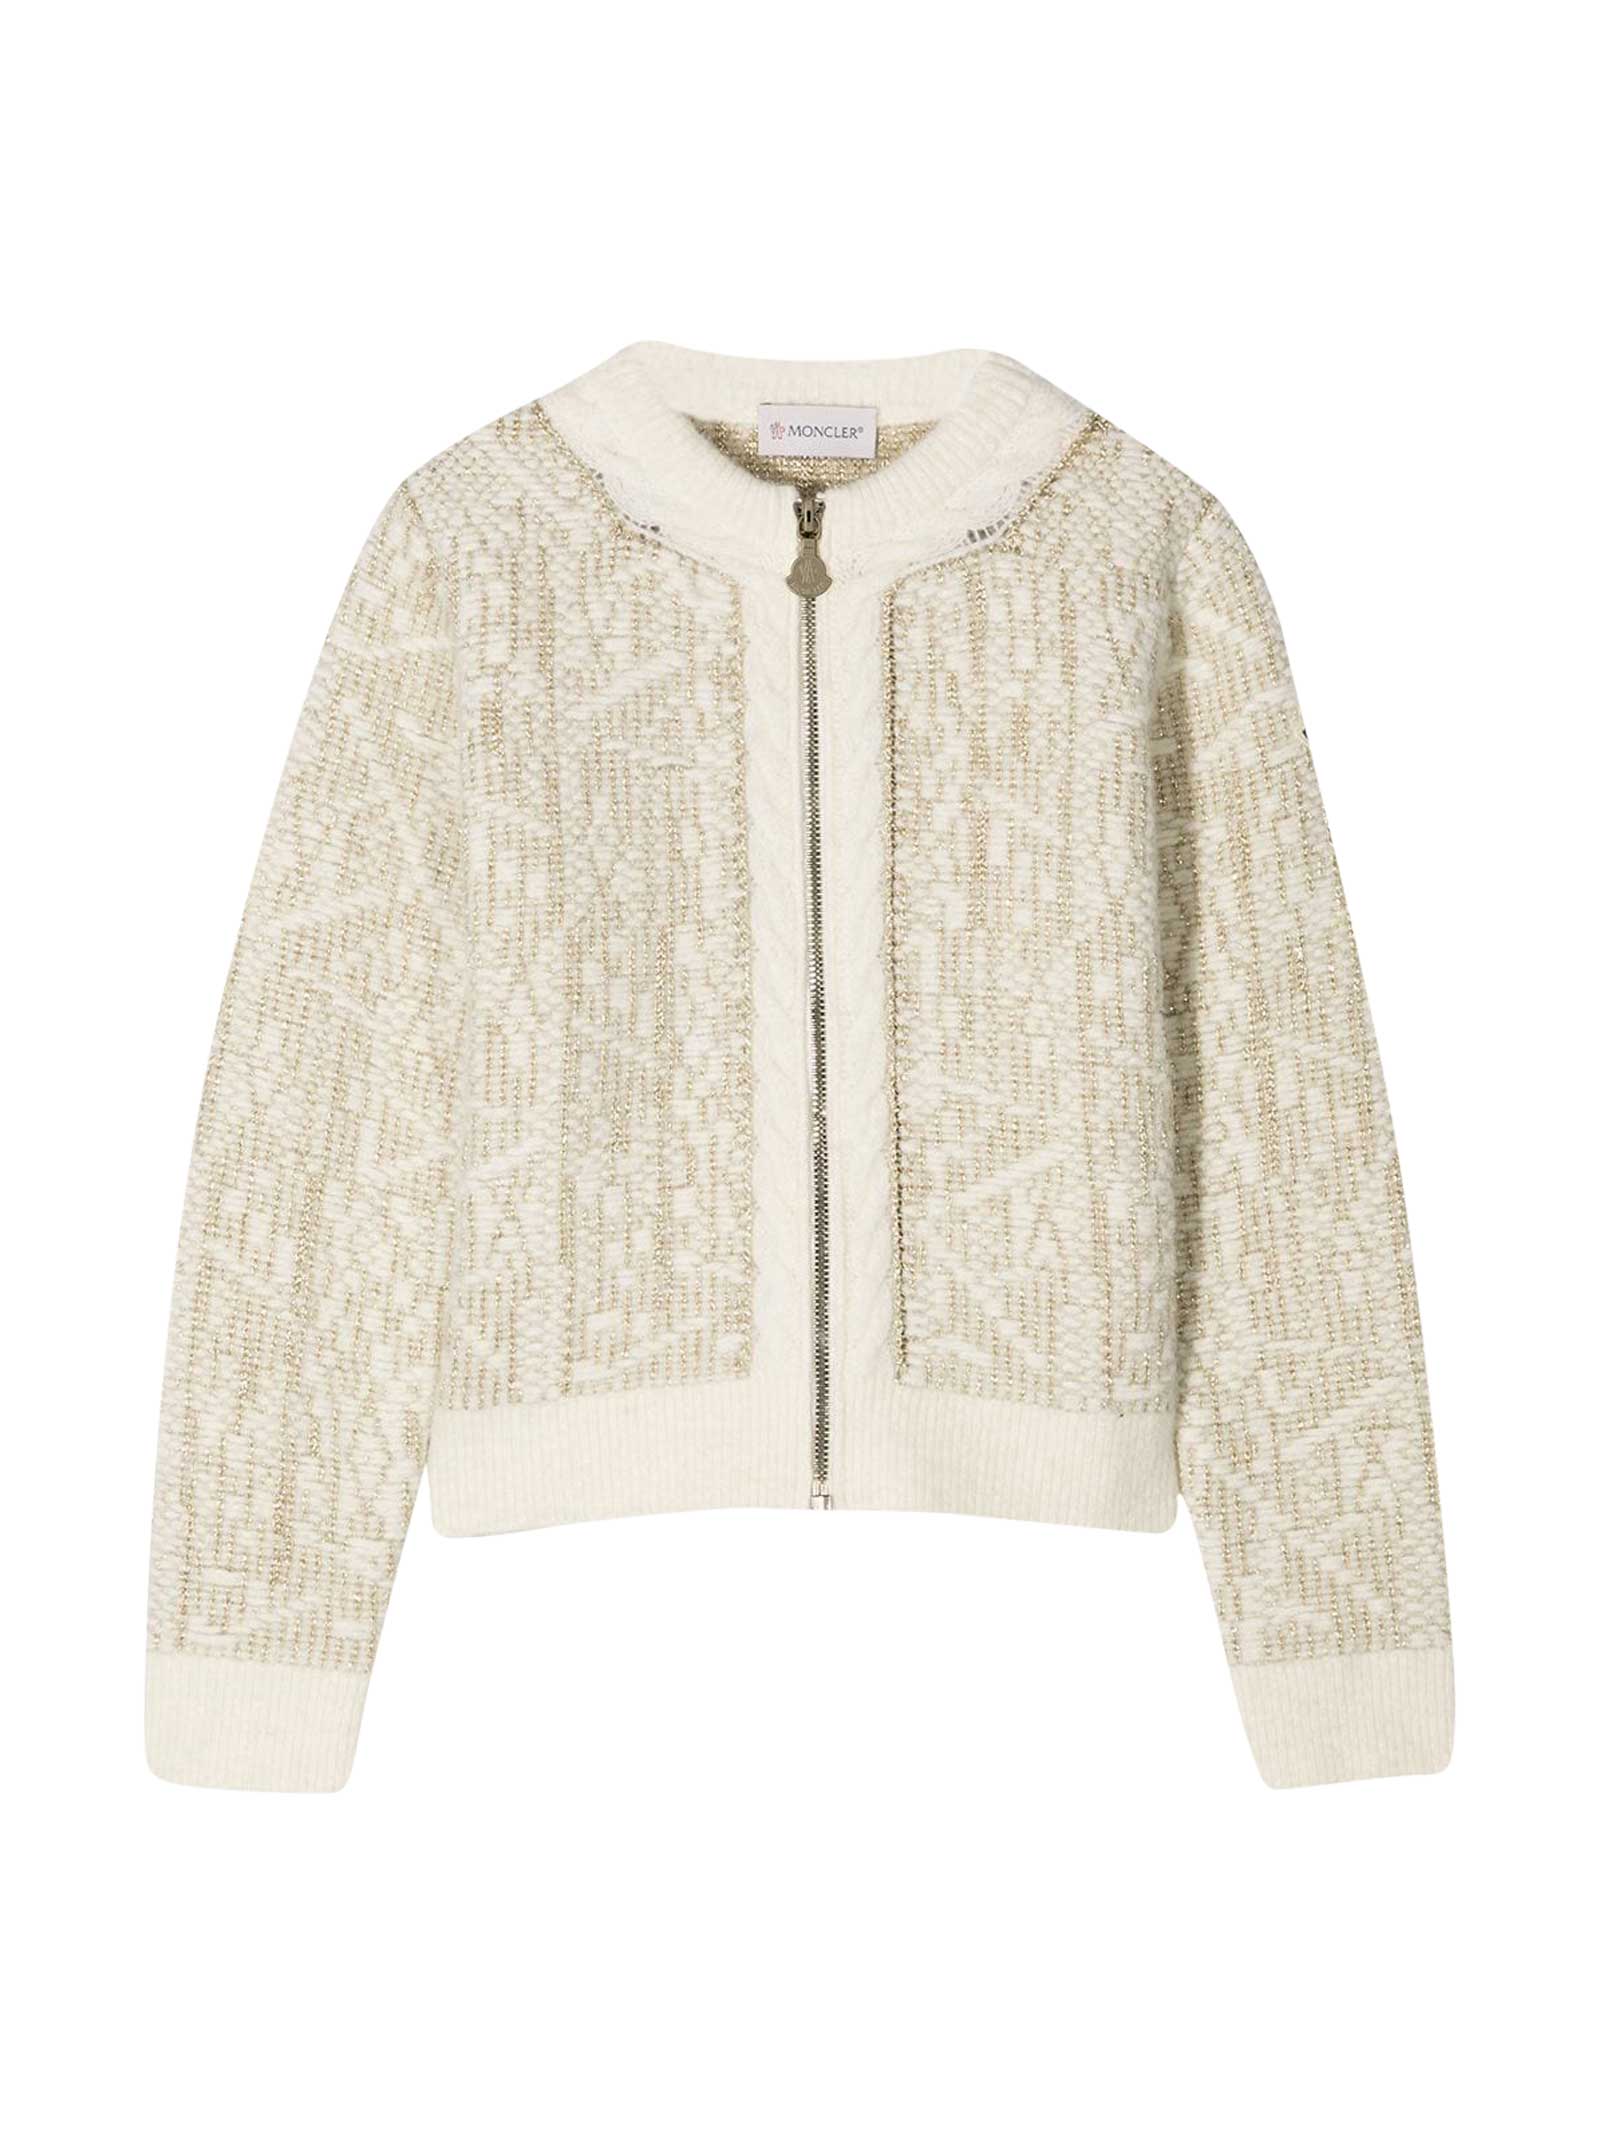 Moncler Ivory Sweater